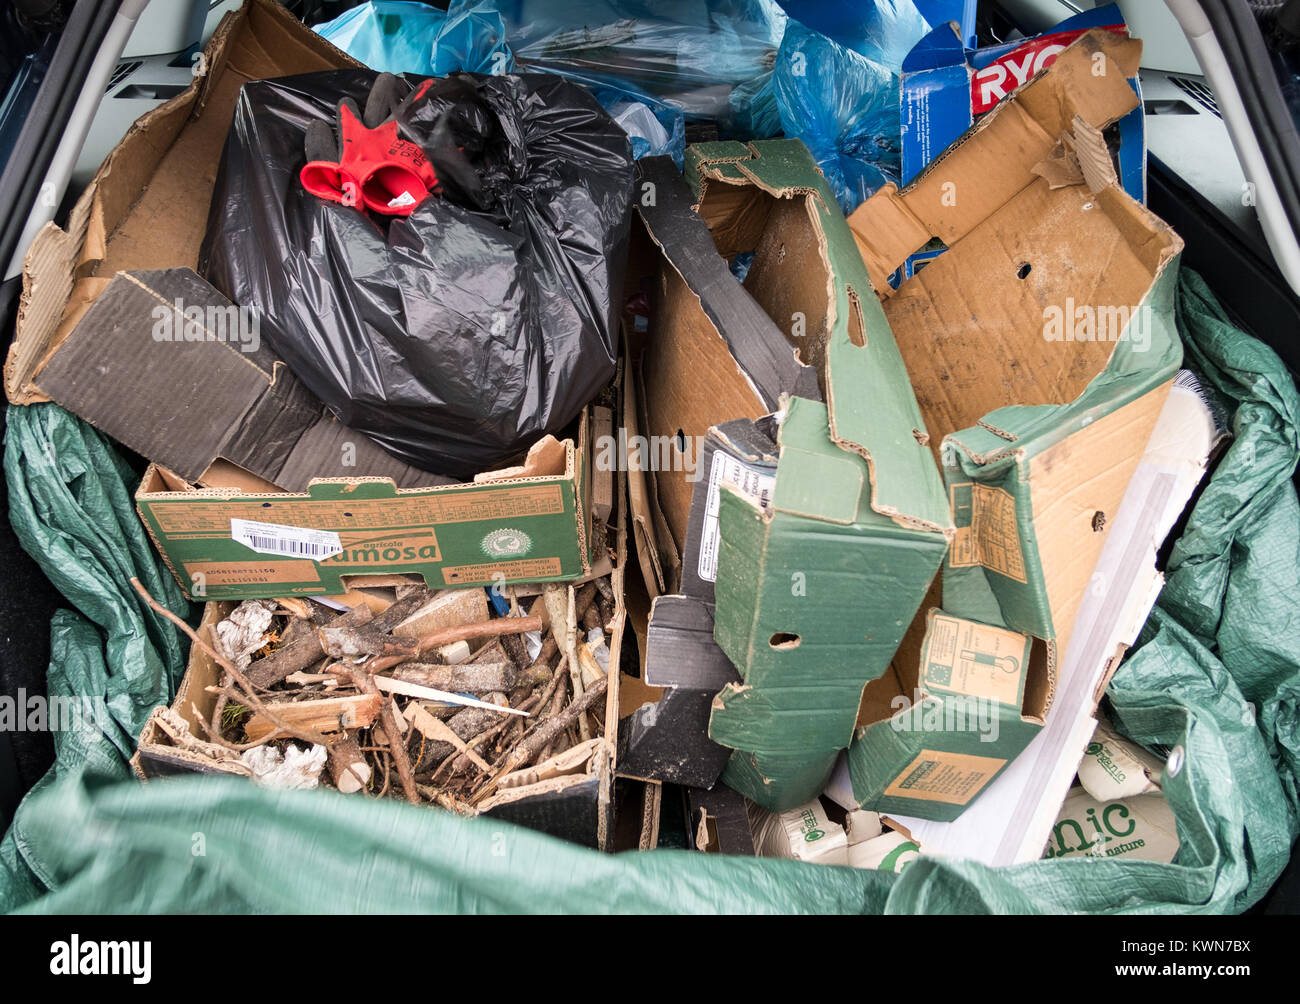 Household rubbish in rear loading area of family estate car ready for recycling. Stock Photo